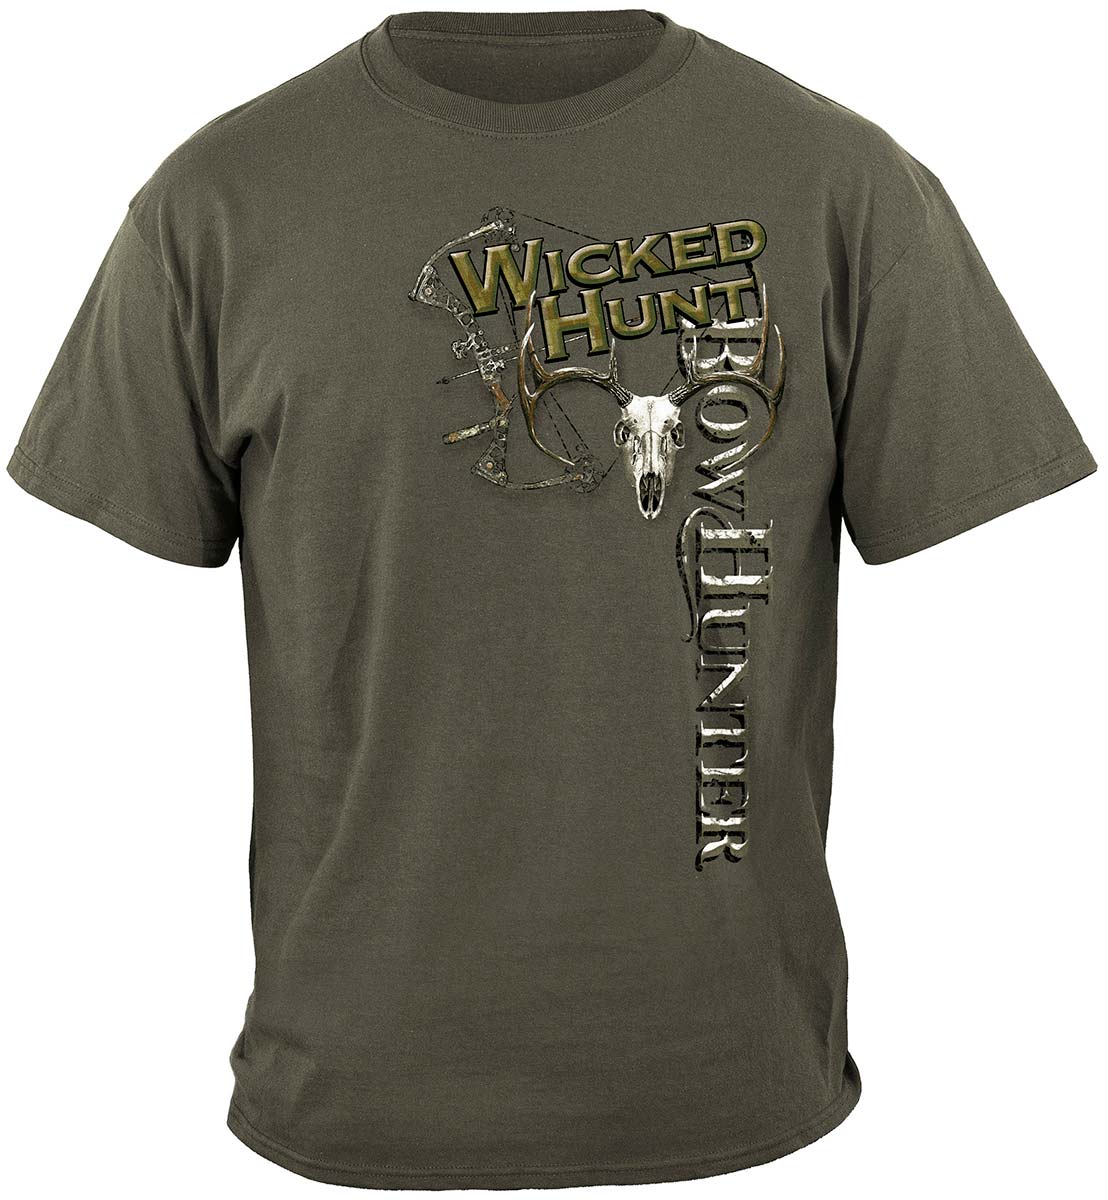 Wicked Hunt Bow Hunting Premium Long Sleeves